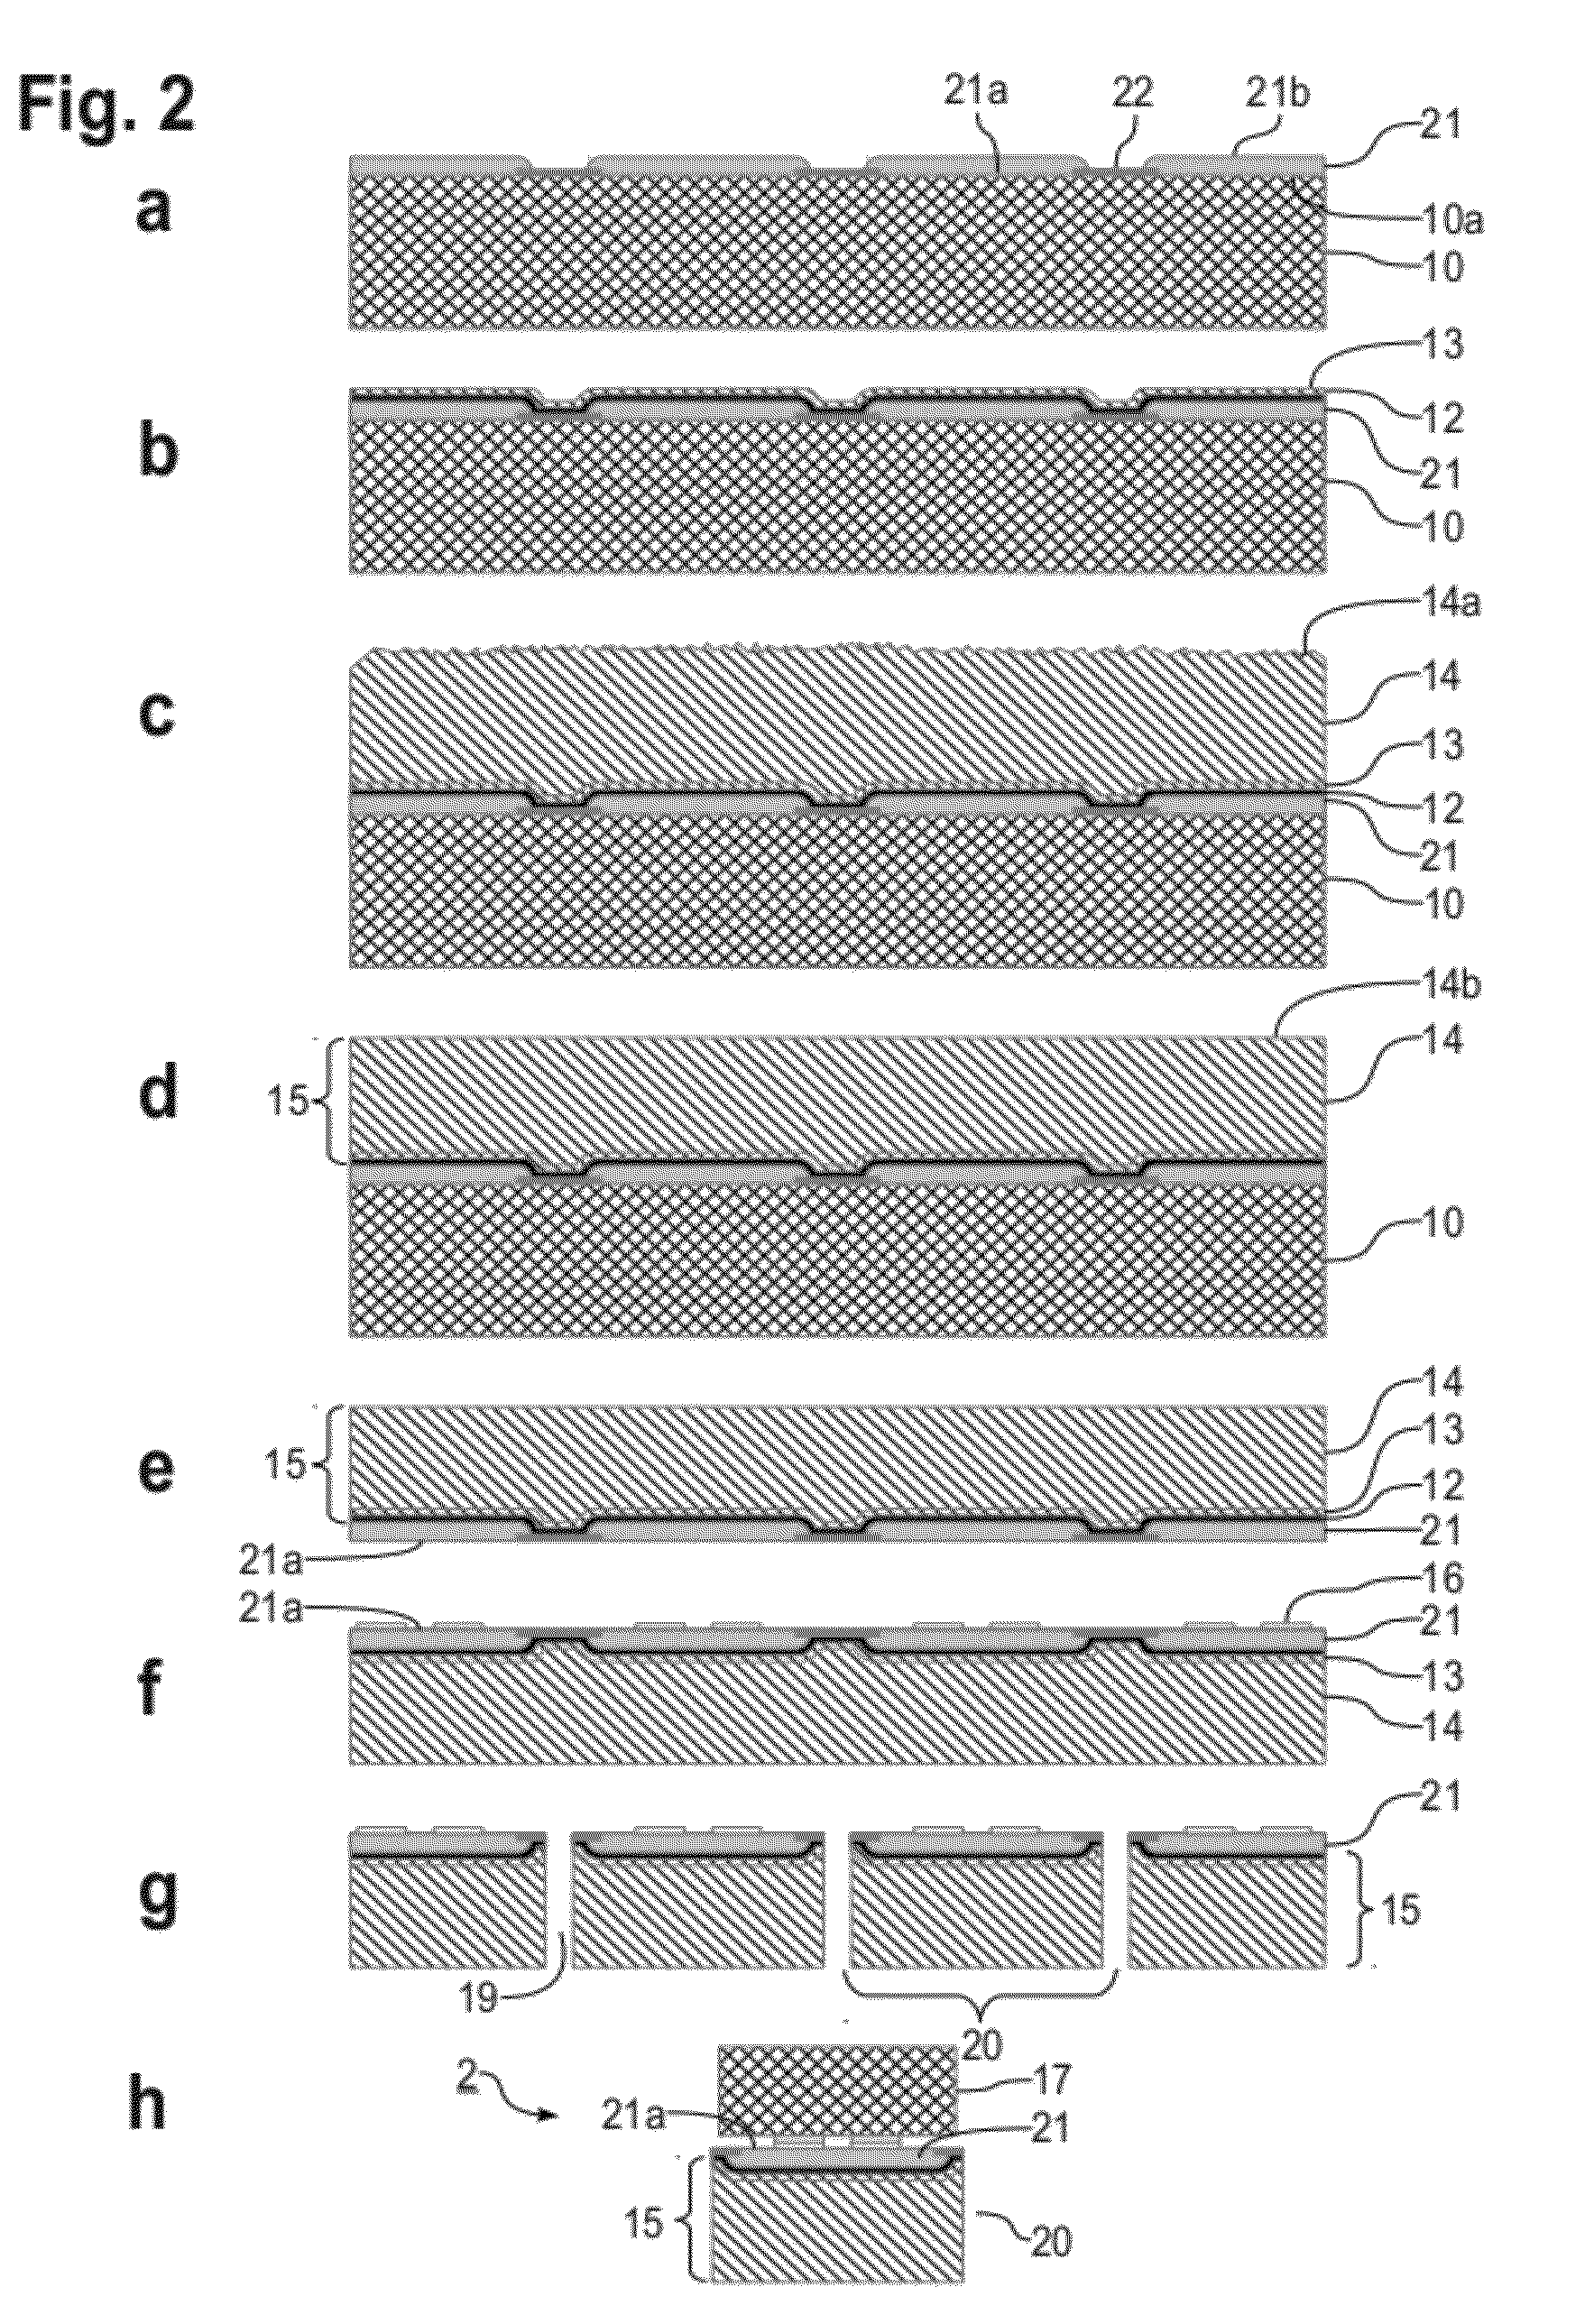 Method of fabrication, device structure and submount comprising diamond on metal substrate for thermal dissipation